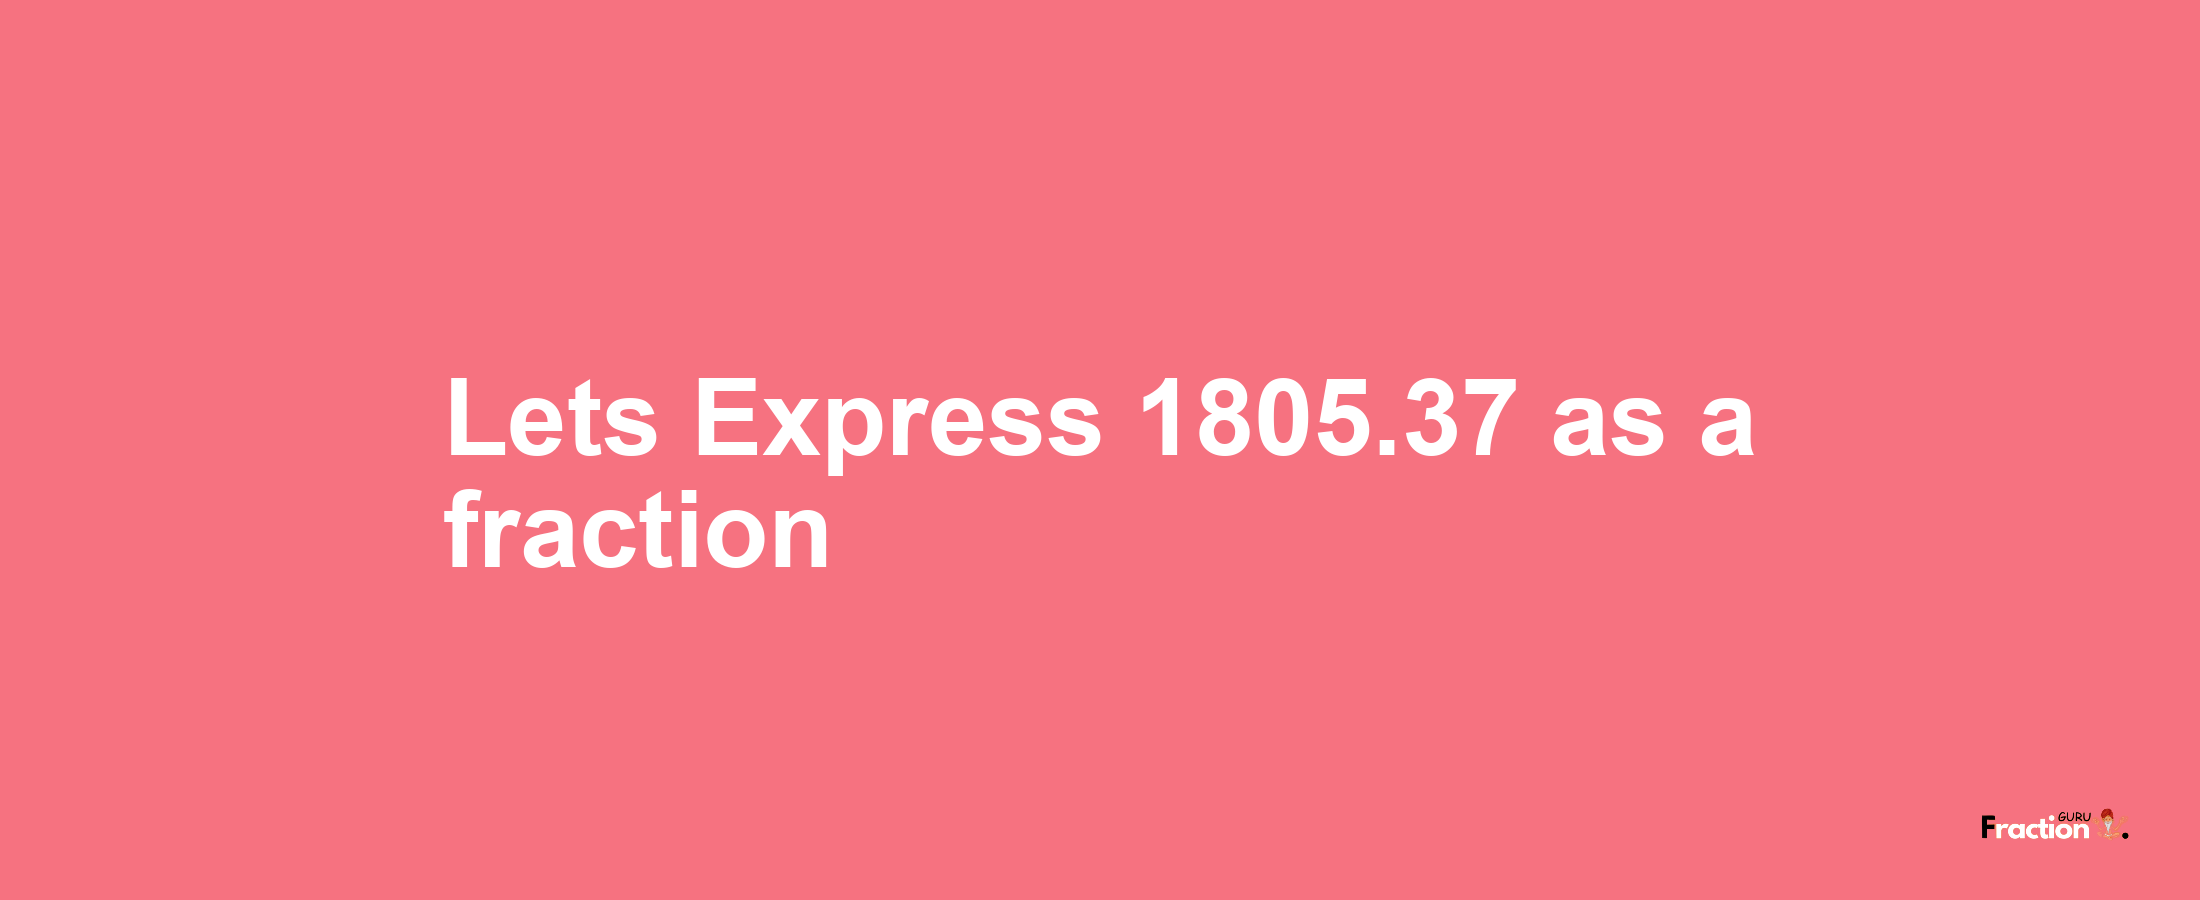 Lets Express 1805.37 as afraction